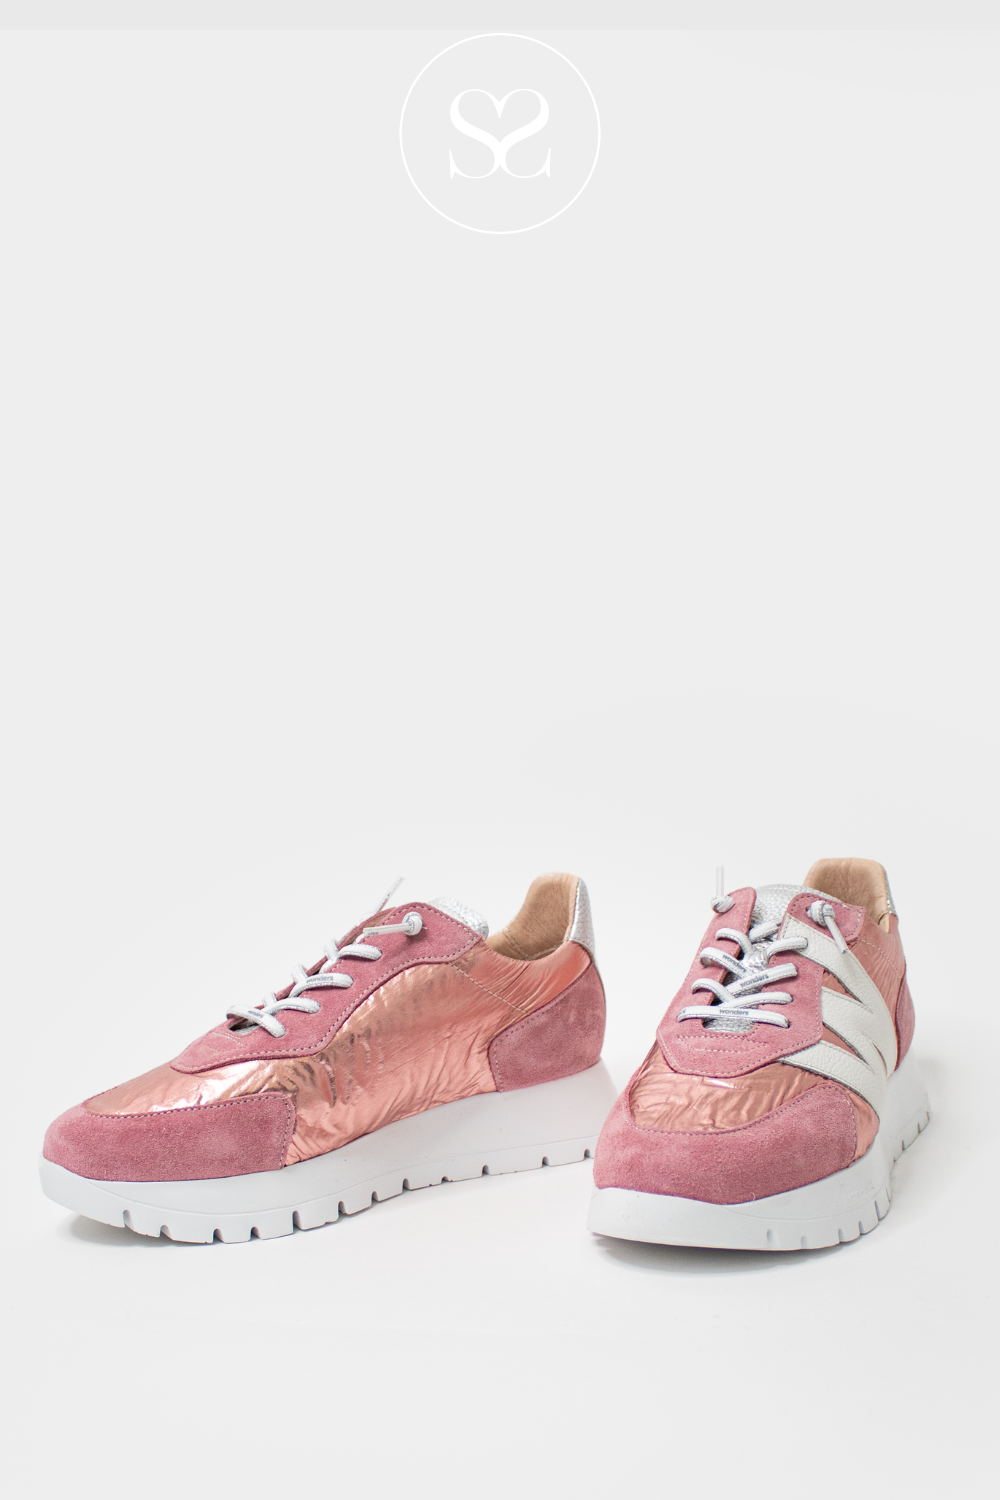 WONDERS A-2464 PINK WEDGE TRAINERS WITH WHITE WONDERS LOGO AND SOLE AND ELASTICATED LACE